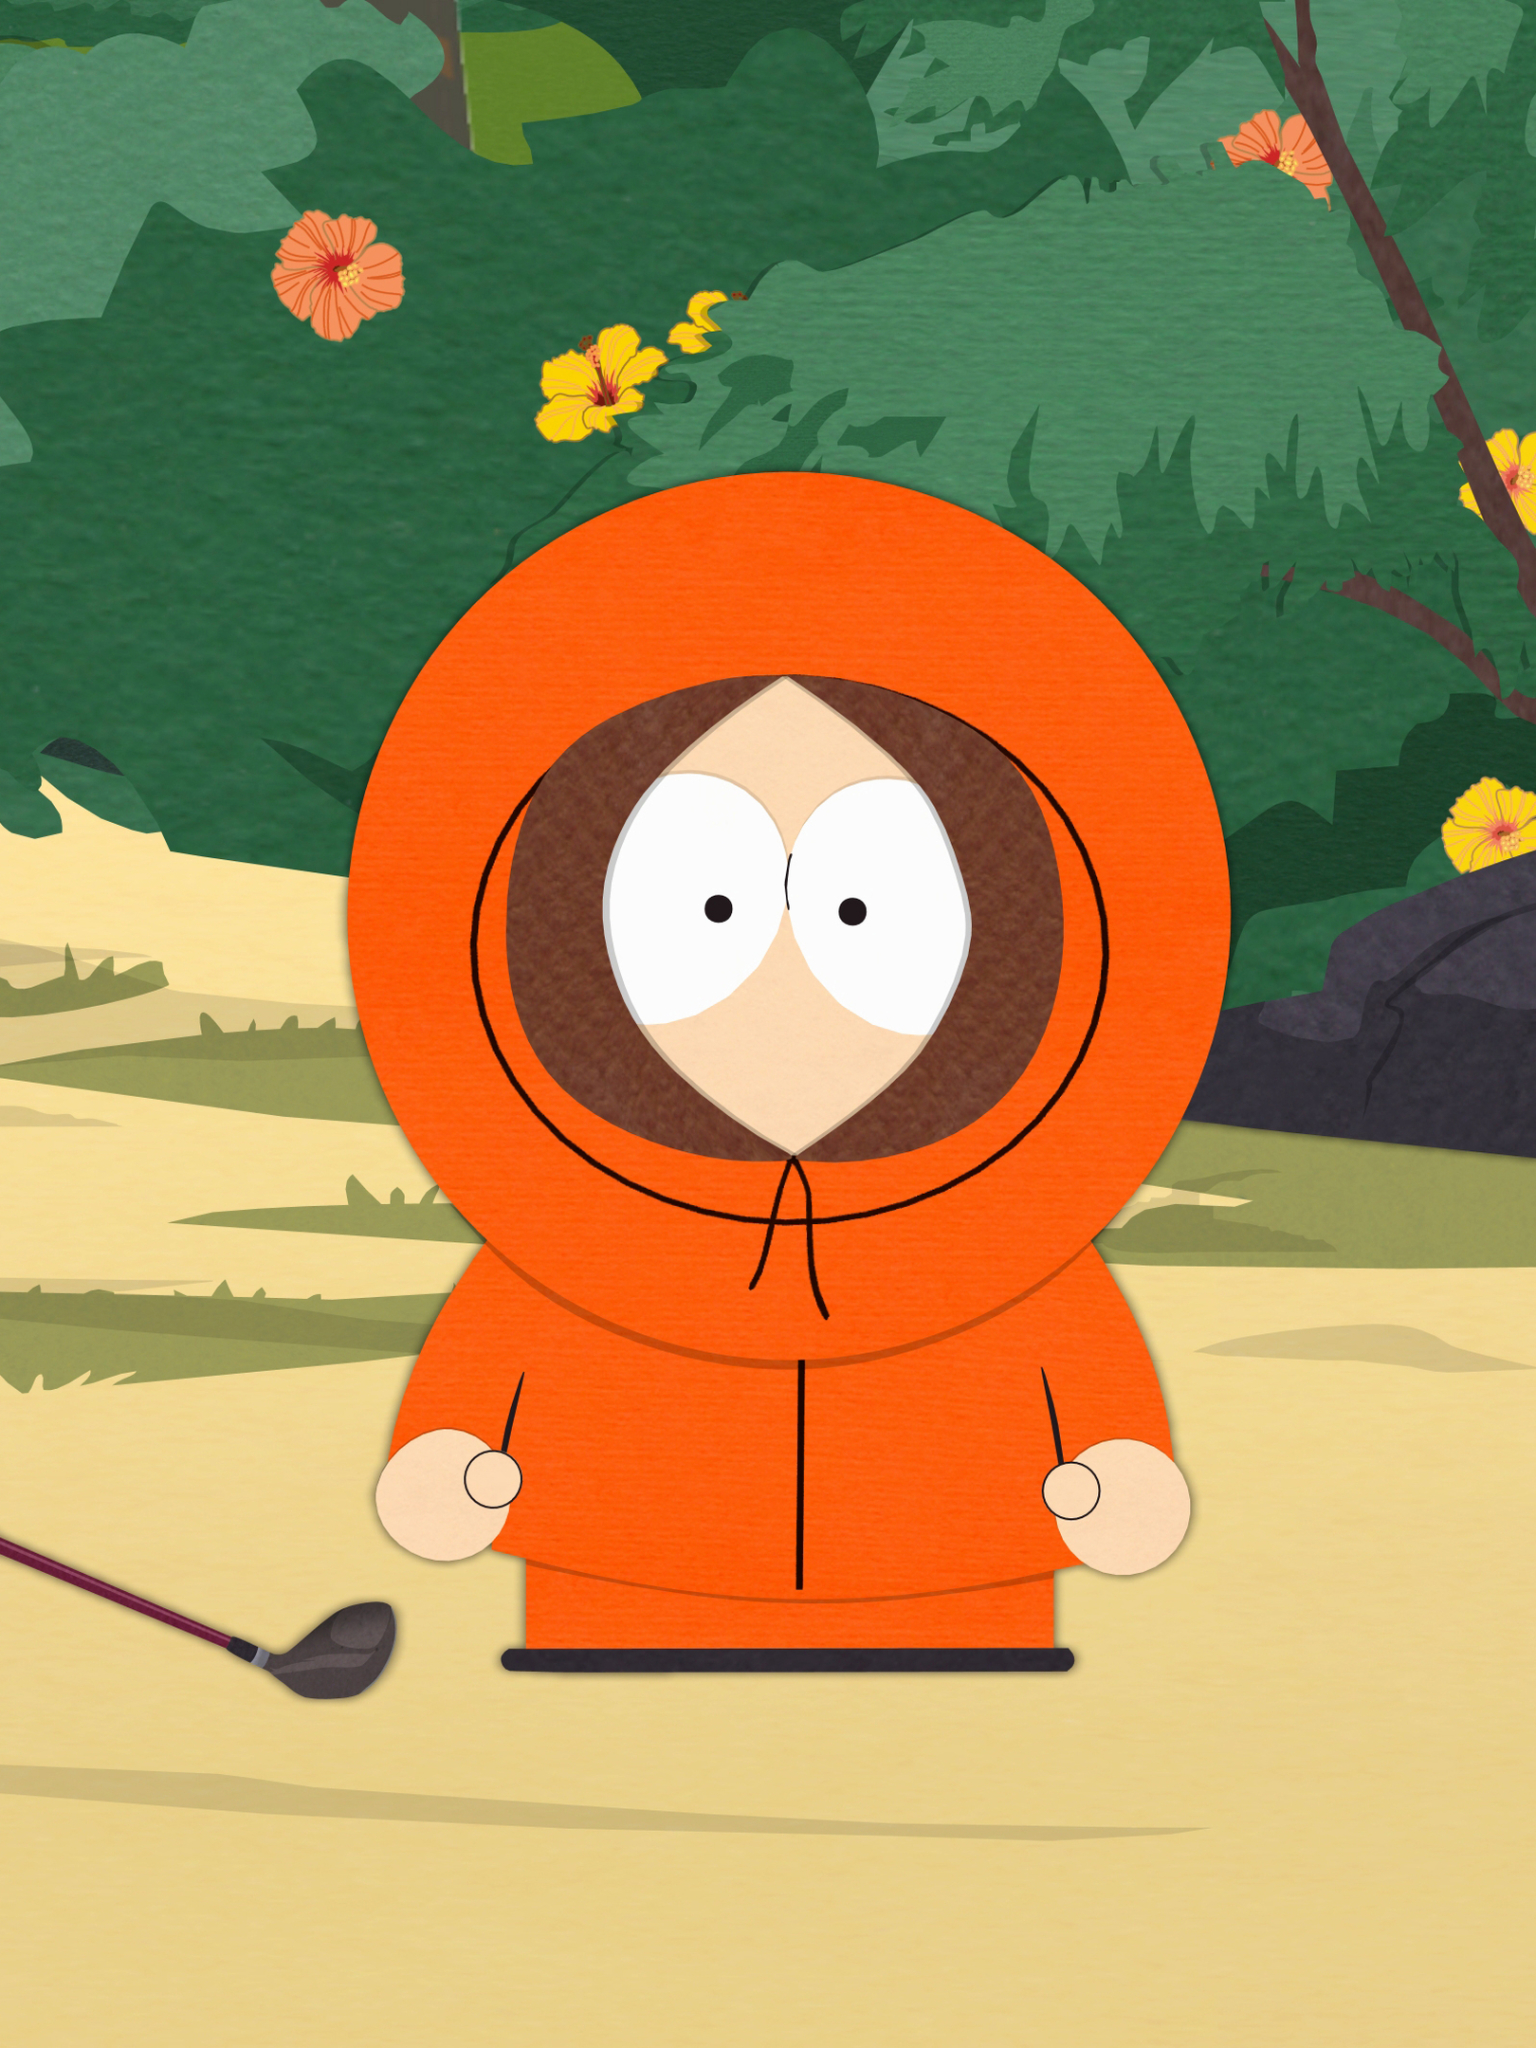 Kenny South Park Funniest Quotes - HD Wallpaper 